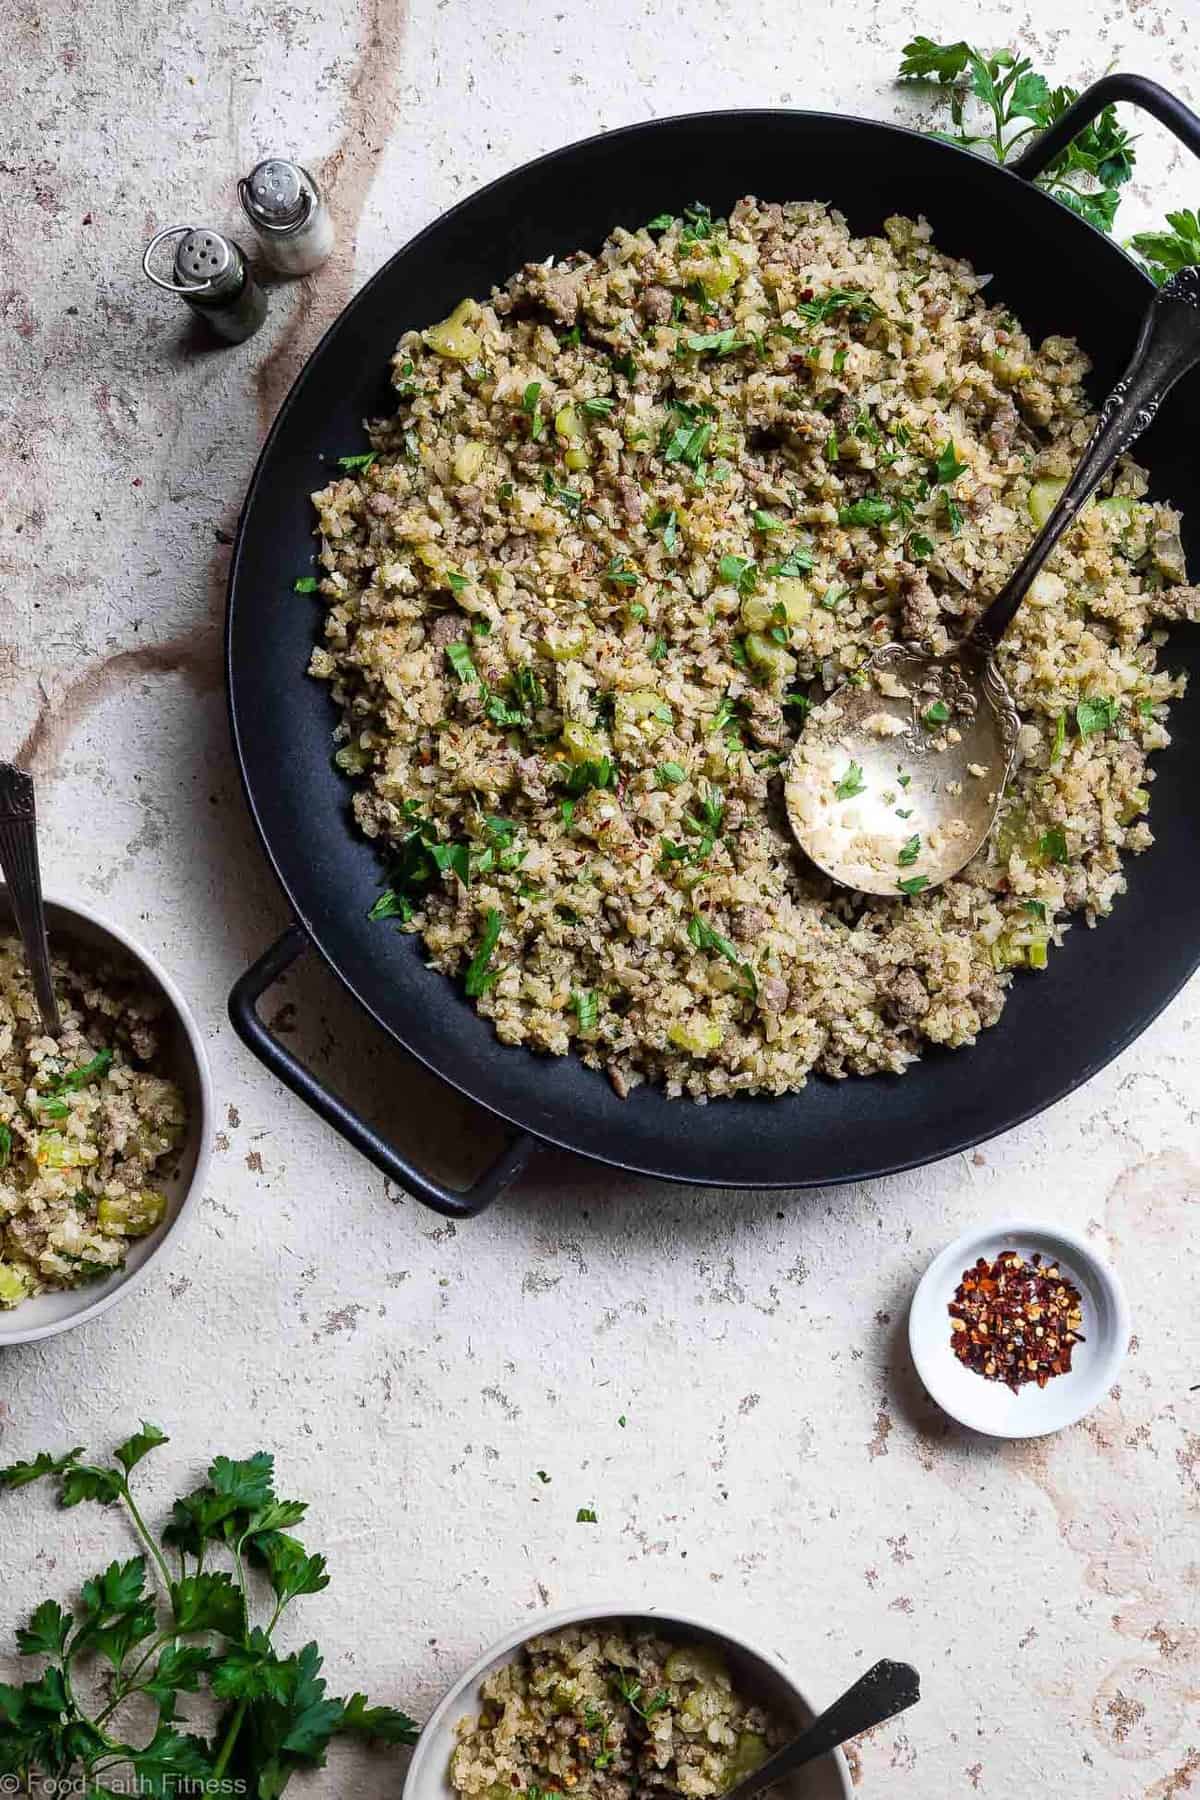 Keto Low Carb Riced Cauliflower Stuffing - This cauliflower rice low carb stuffing recipe is an EASY healthy holiday side that tastes like comfort food, but you won't miss the carbs! Paleo/whole30, only 150 calories and 3 SmartPoints! | #Foodfaithfitness | #Glutenfree #Paleo #Lowcarb #Keto #Whole30